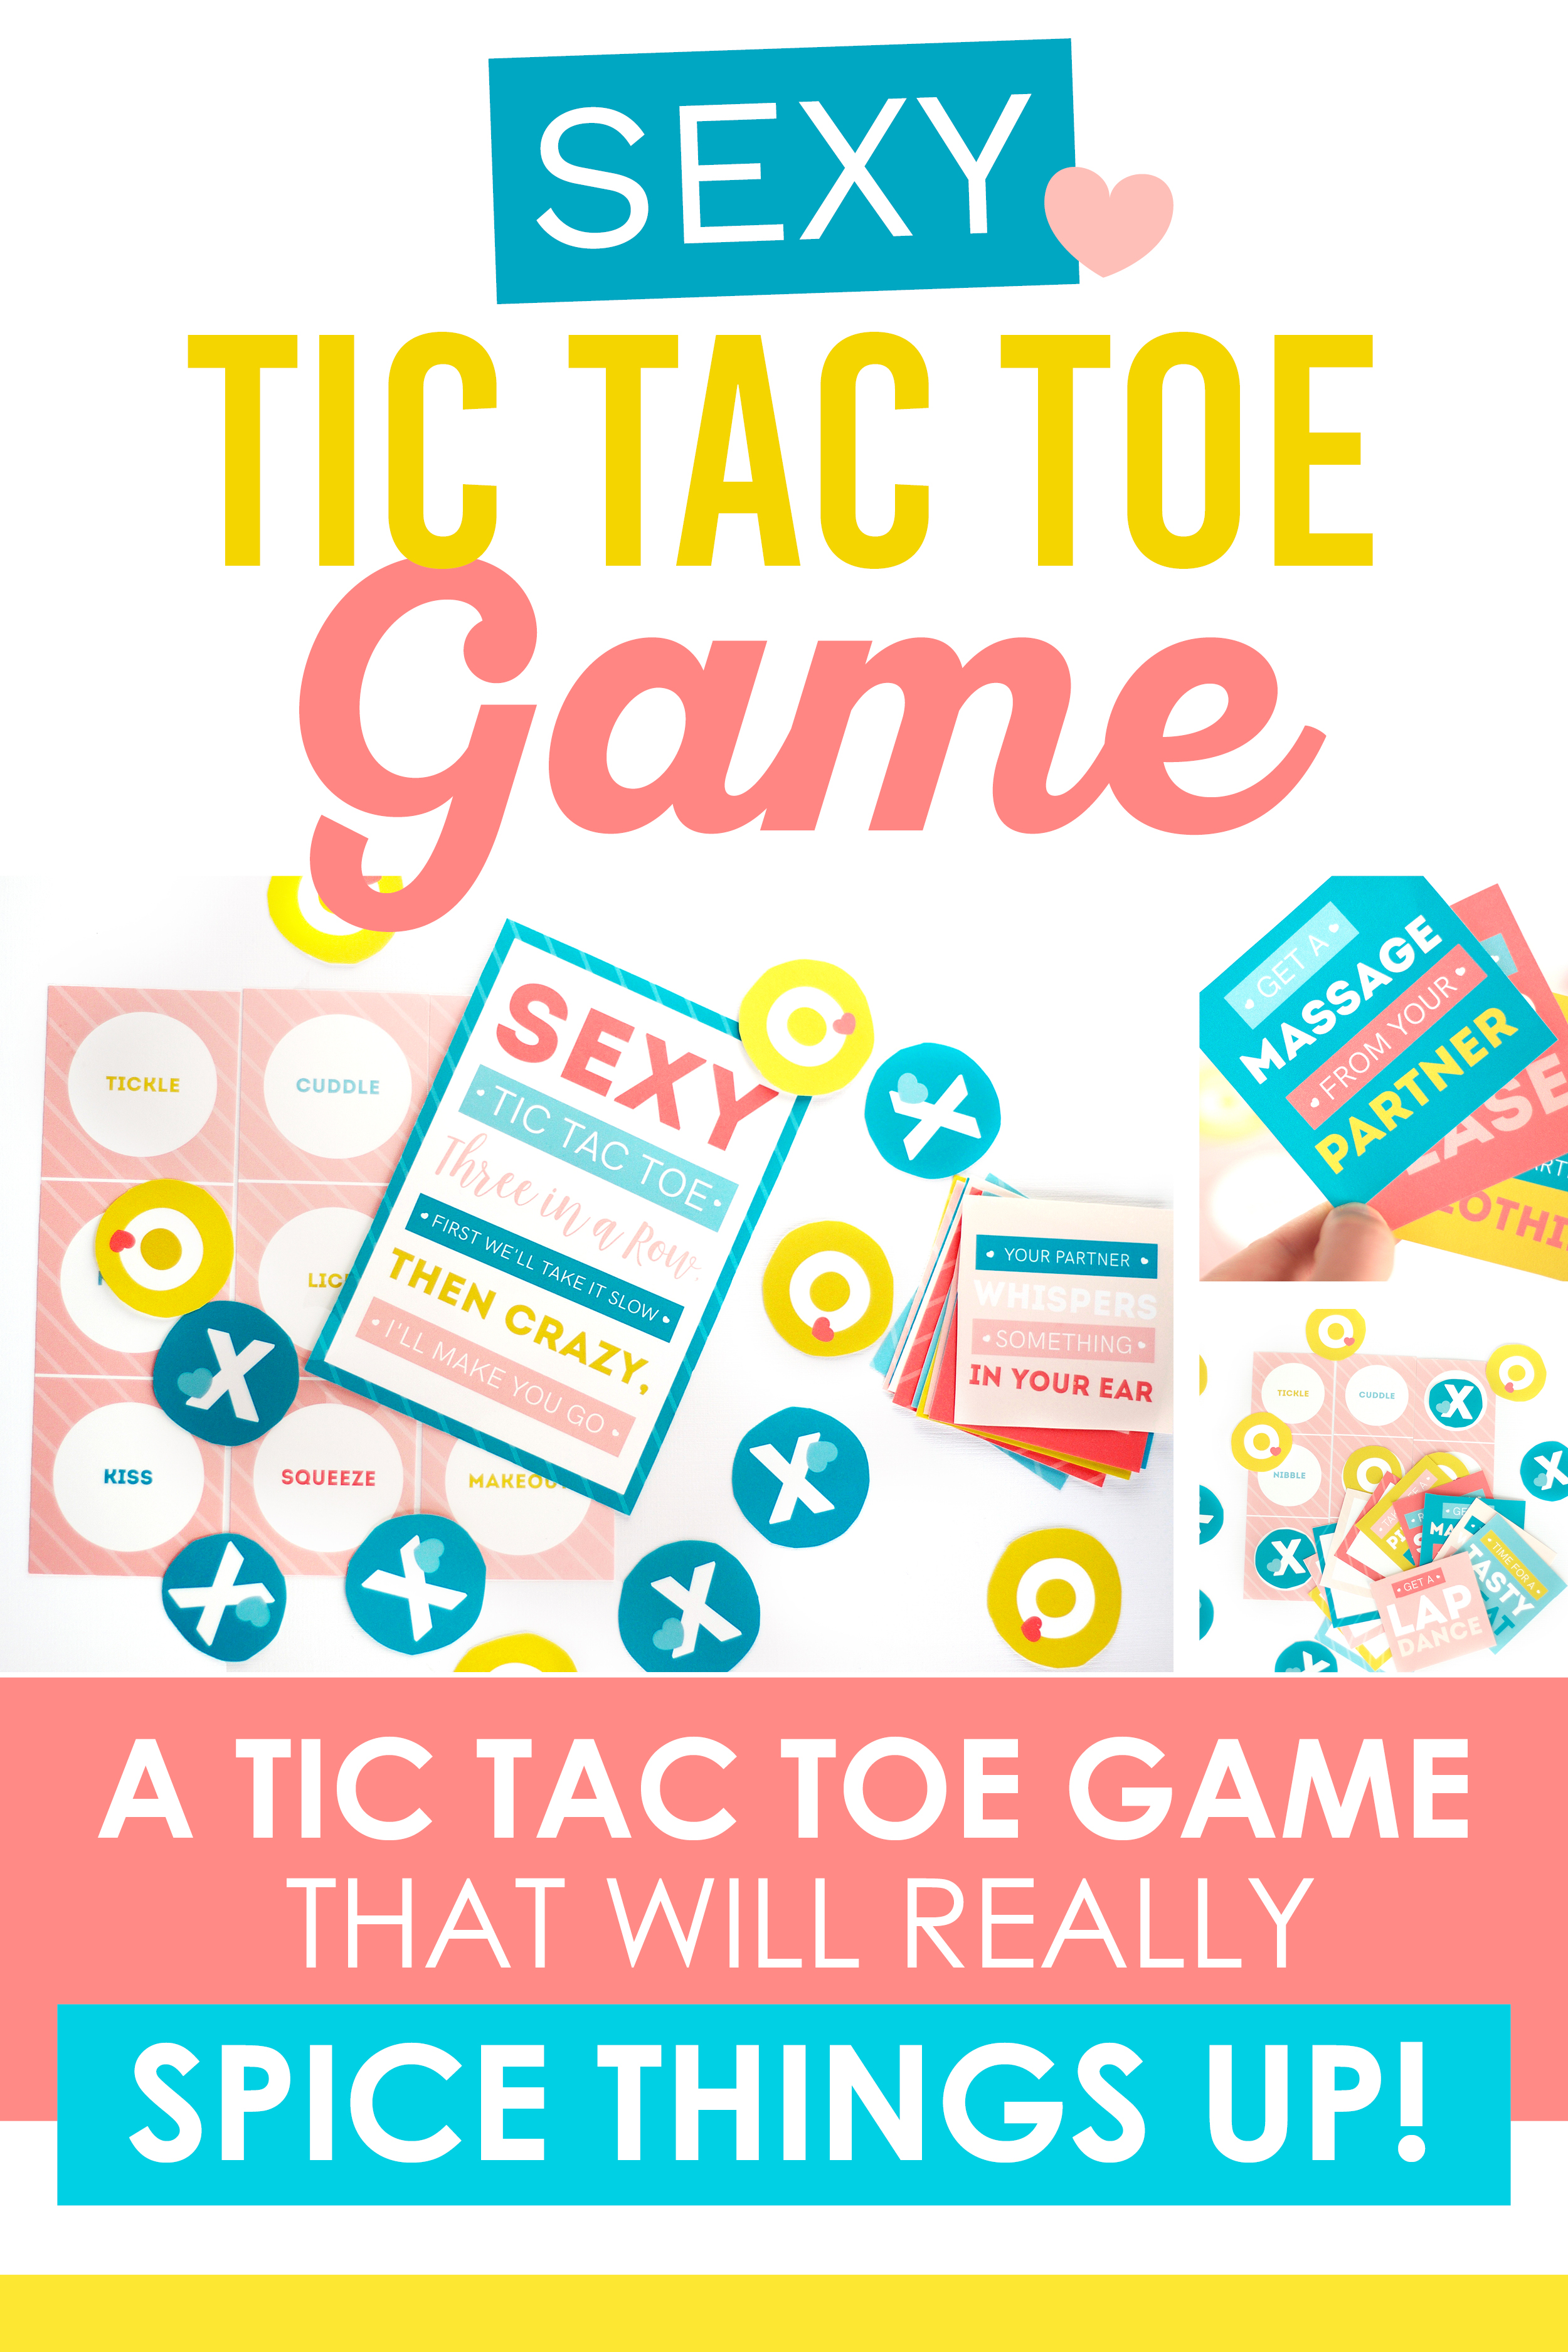 Win in the bedroom with this Sexy Tic Tac Toe Game! It will spice up your marriage TONIGHT! #tictactoegame #tictactoeboard